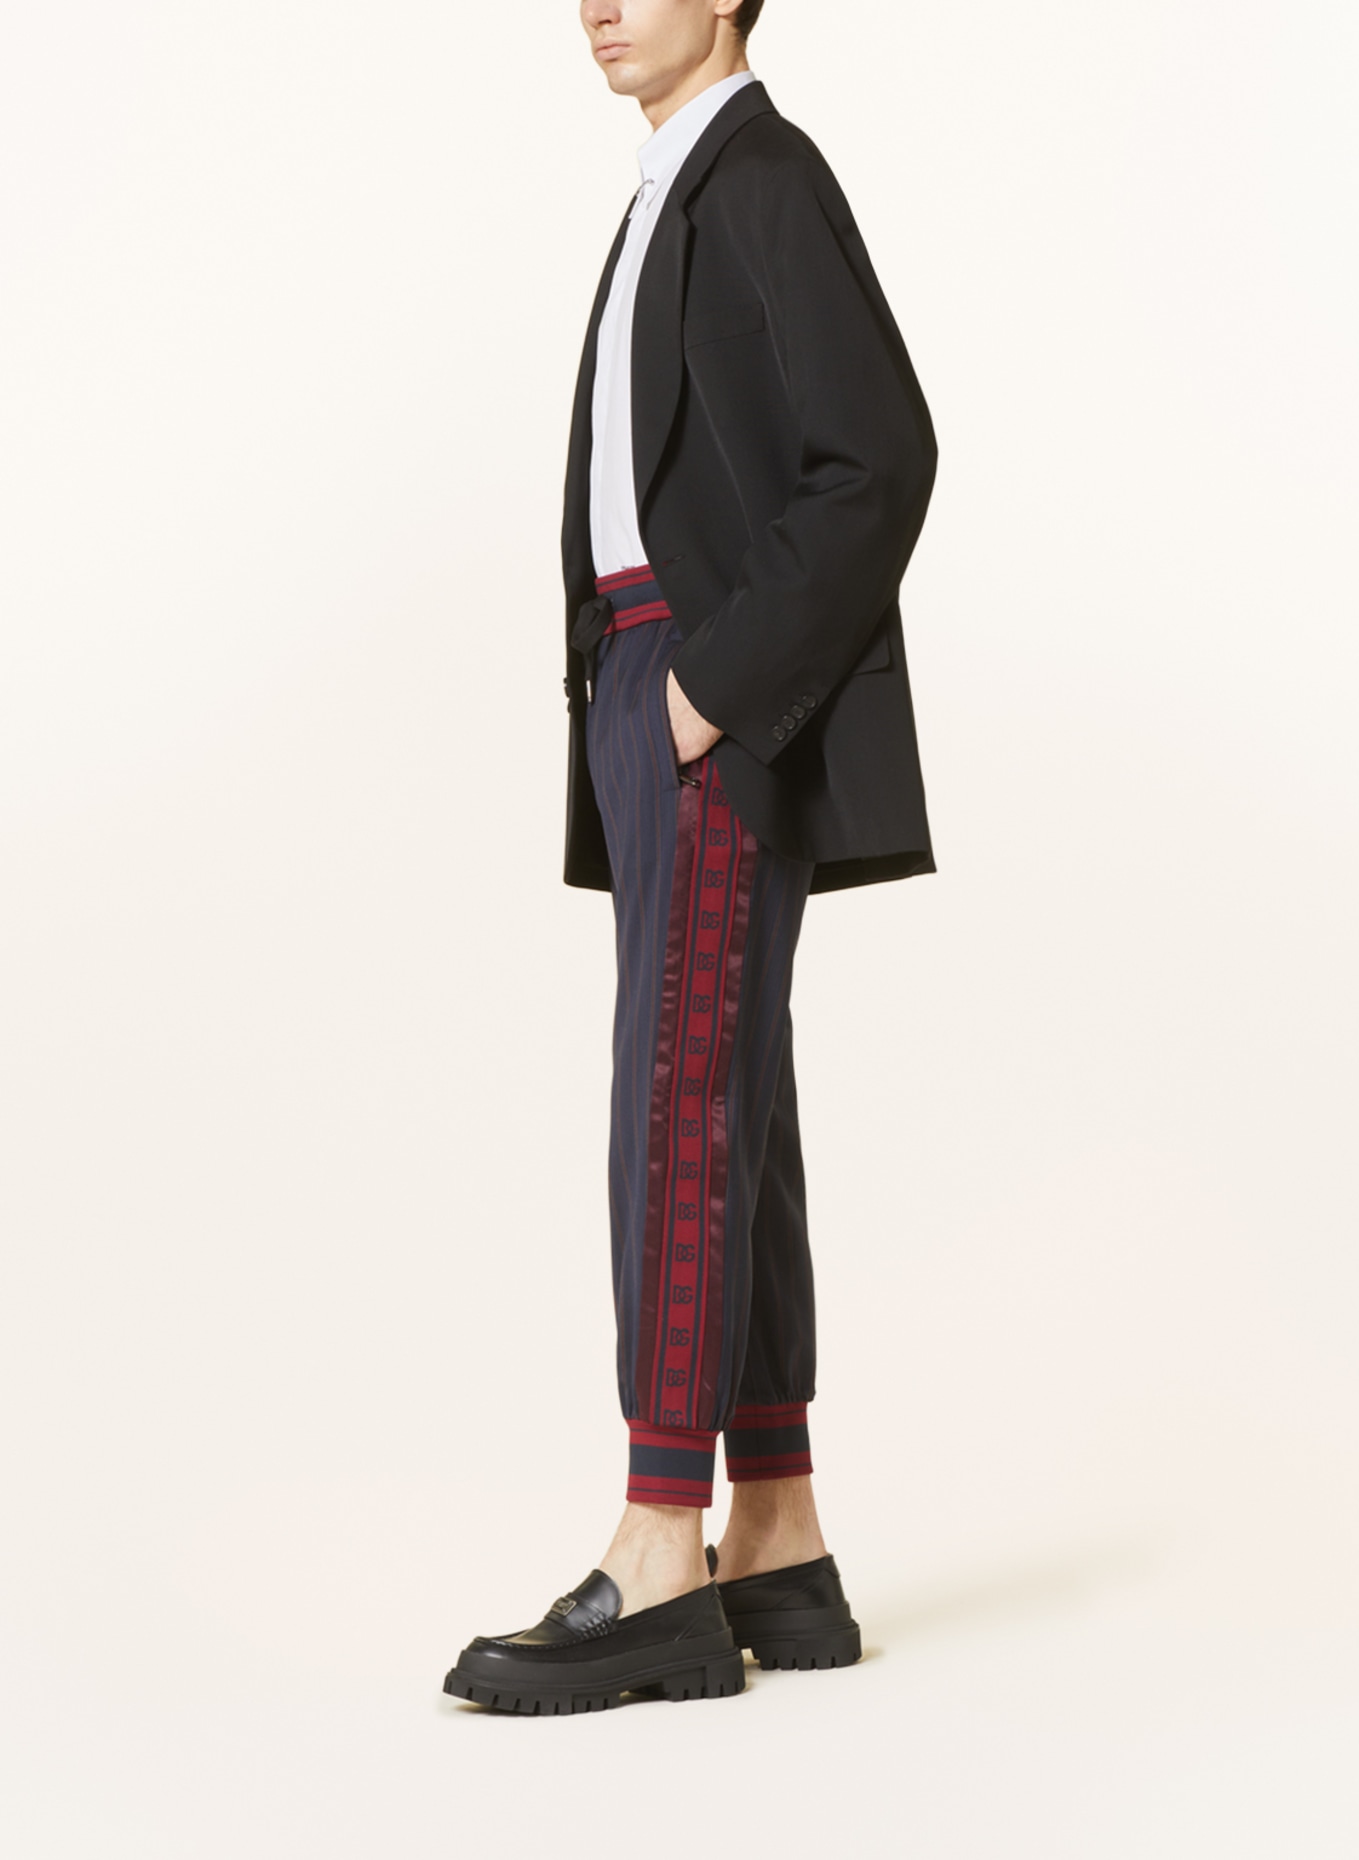 DOLCE & GABBANA Pants in jogger style with tuxedo stripes, Color: BLACK/ DARK RED (Image 4)